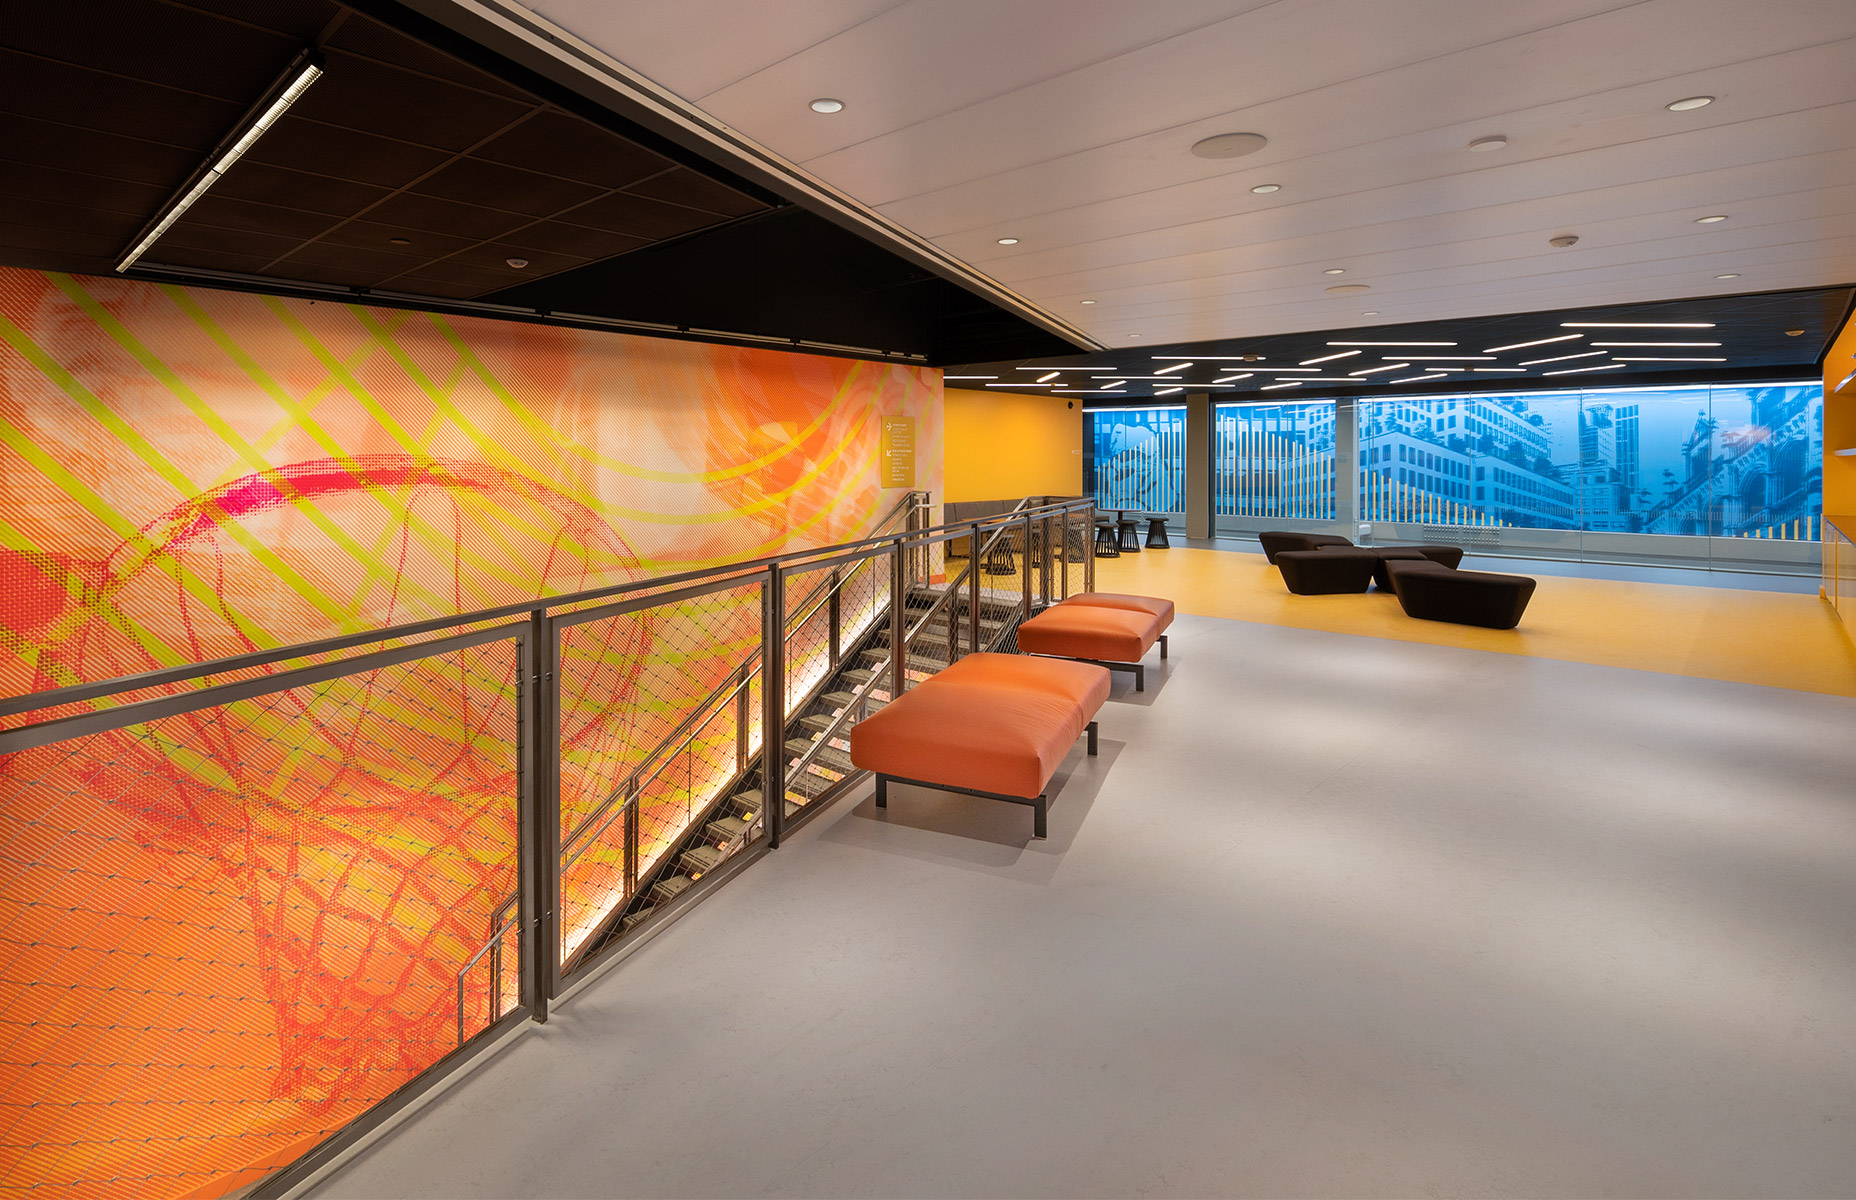 Large wall graphic for The Playground Seagram Building.